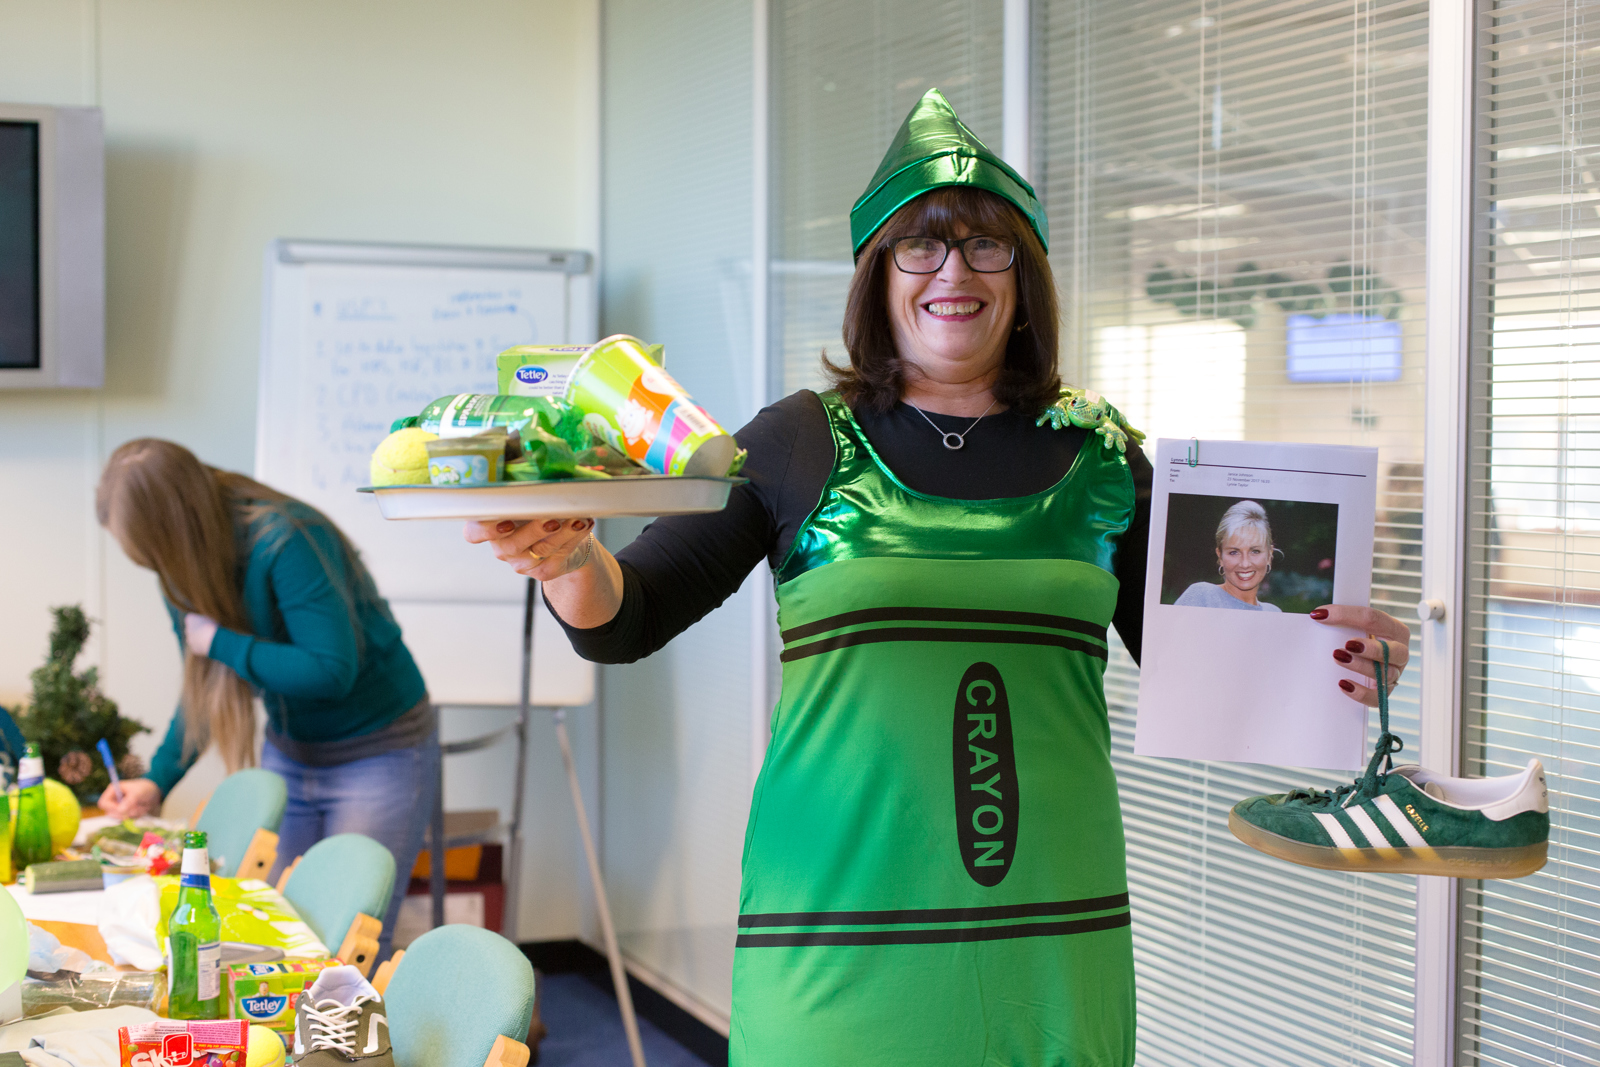 Towergate Colleague dressed up as a green crayon for Go Green Day